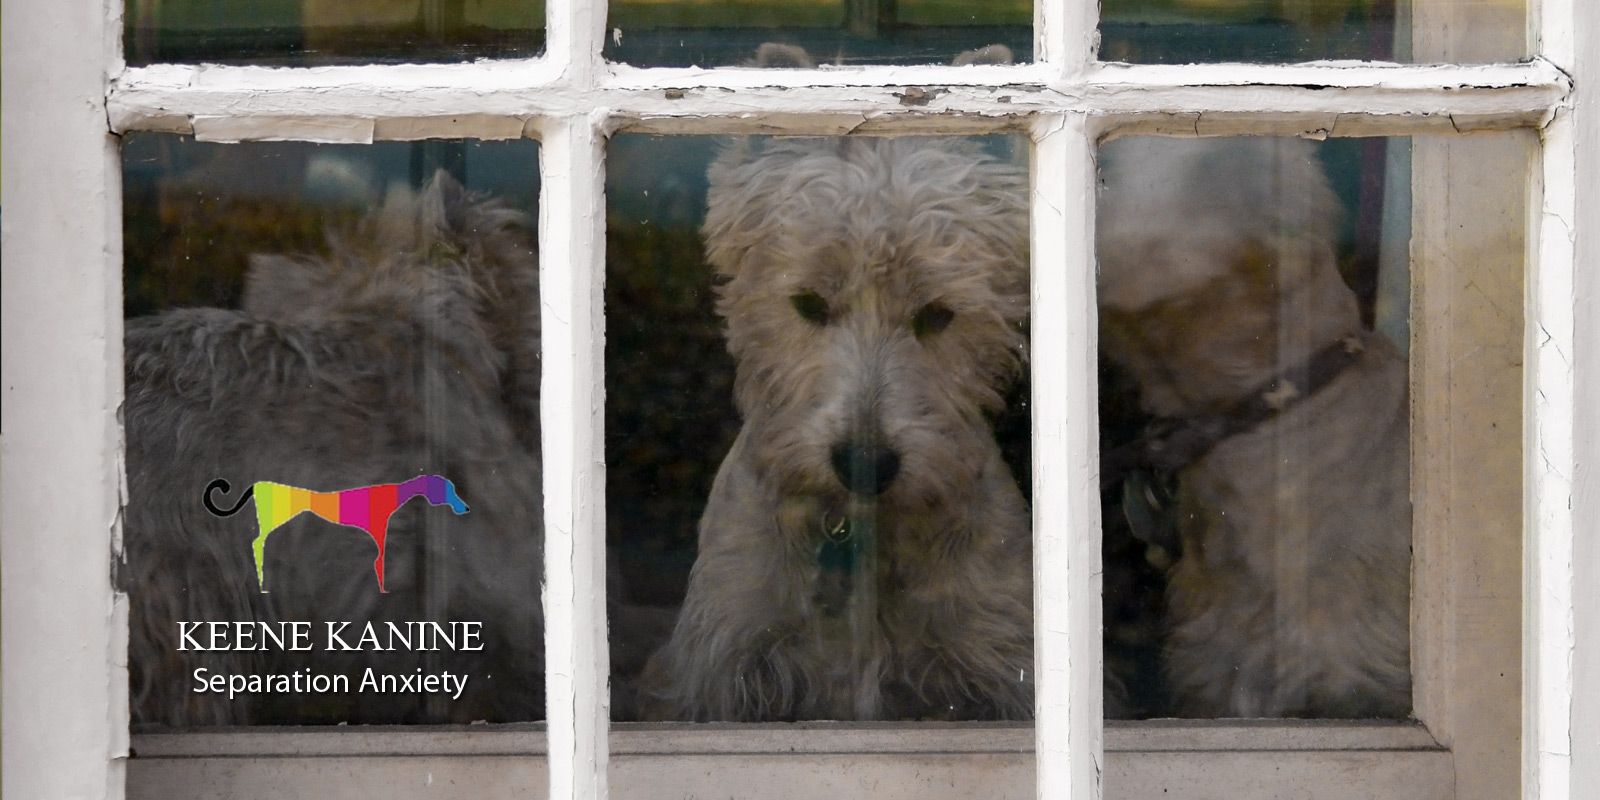 Top Dog Separation Anxiety Training by Maureen Keene of Keene Kanine, Separation Anxiety Trainer in Long Beach and Nassau County. Free Consultation.